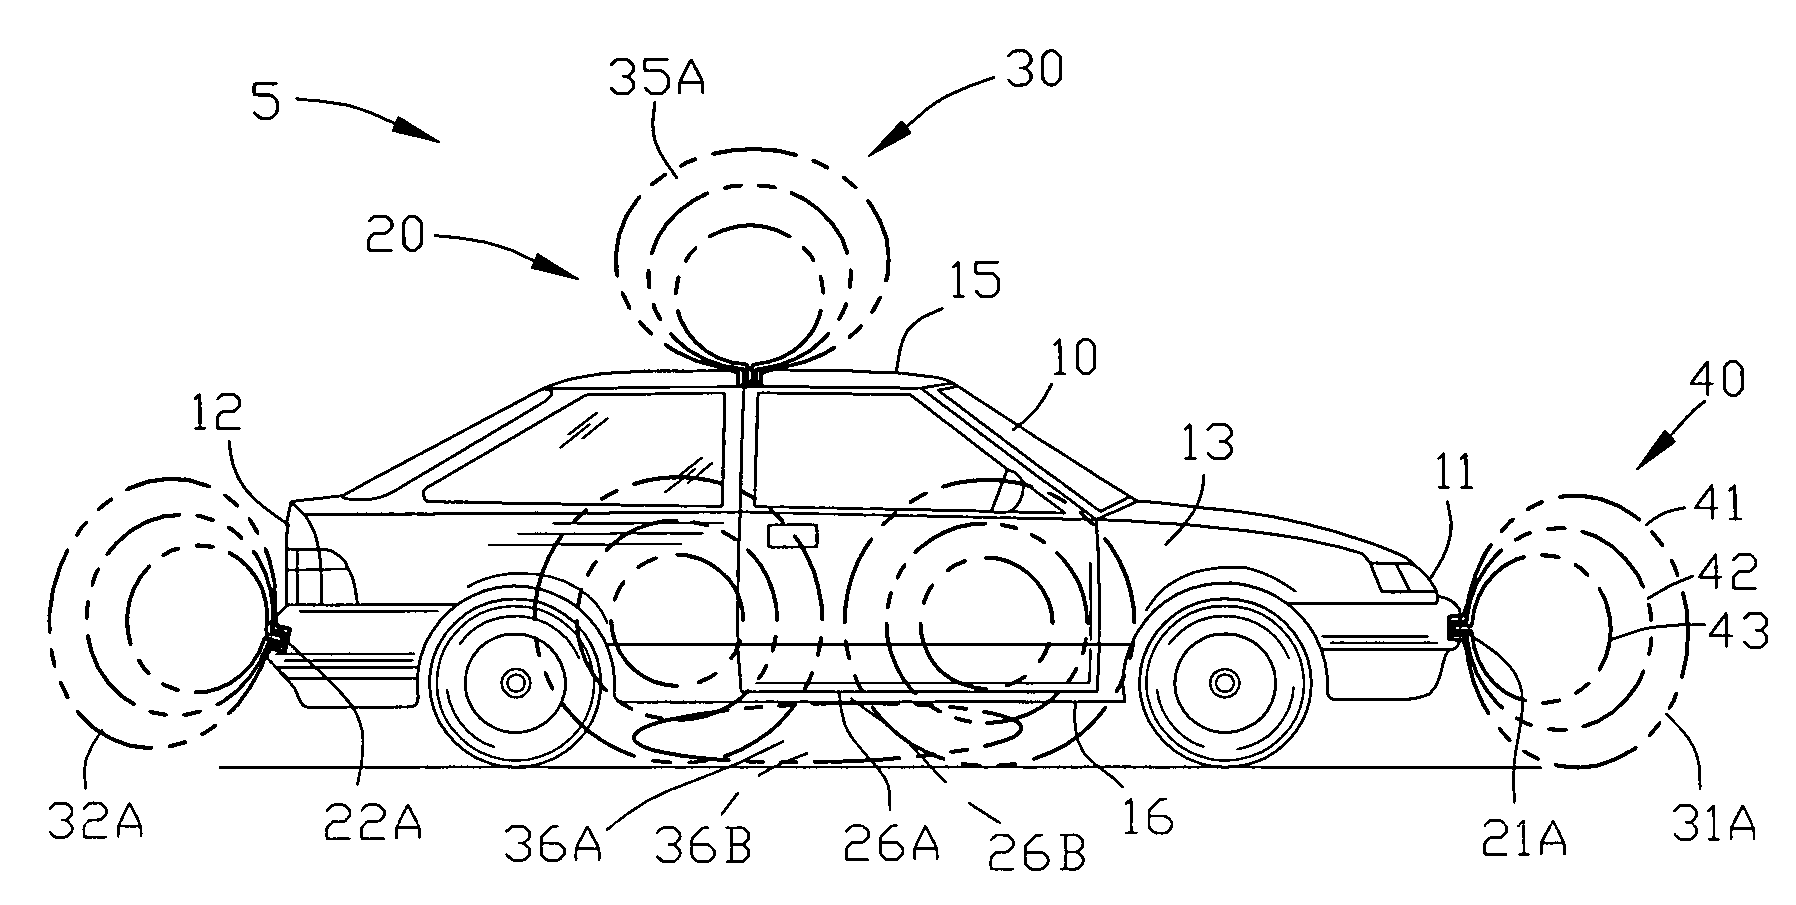 Collision air bag and flotation system